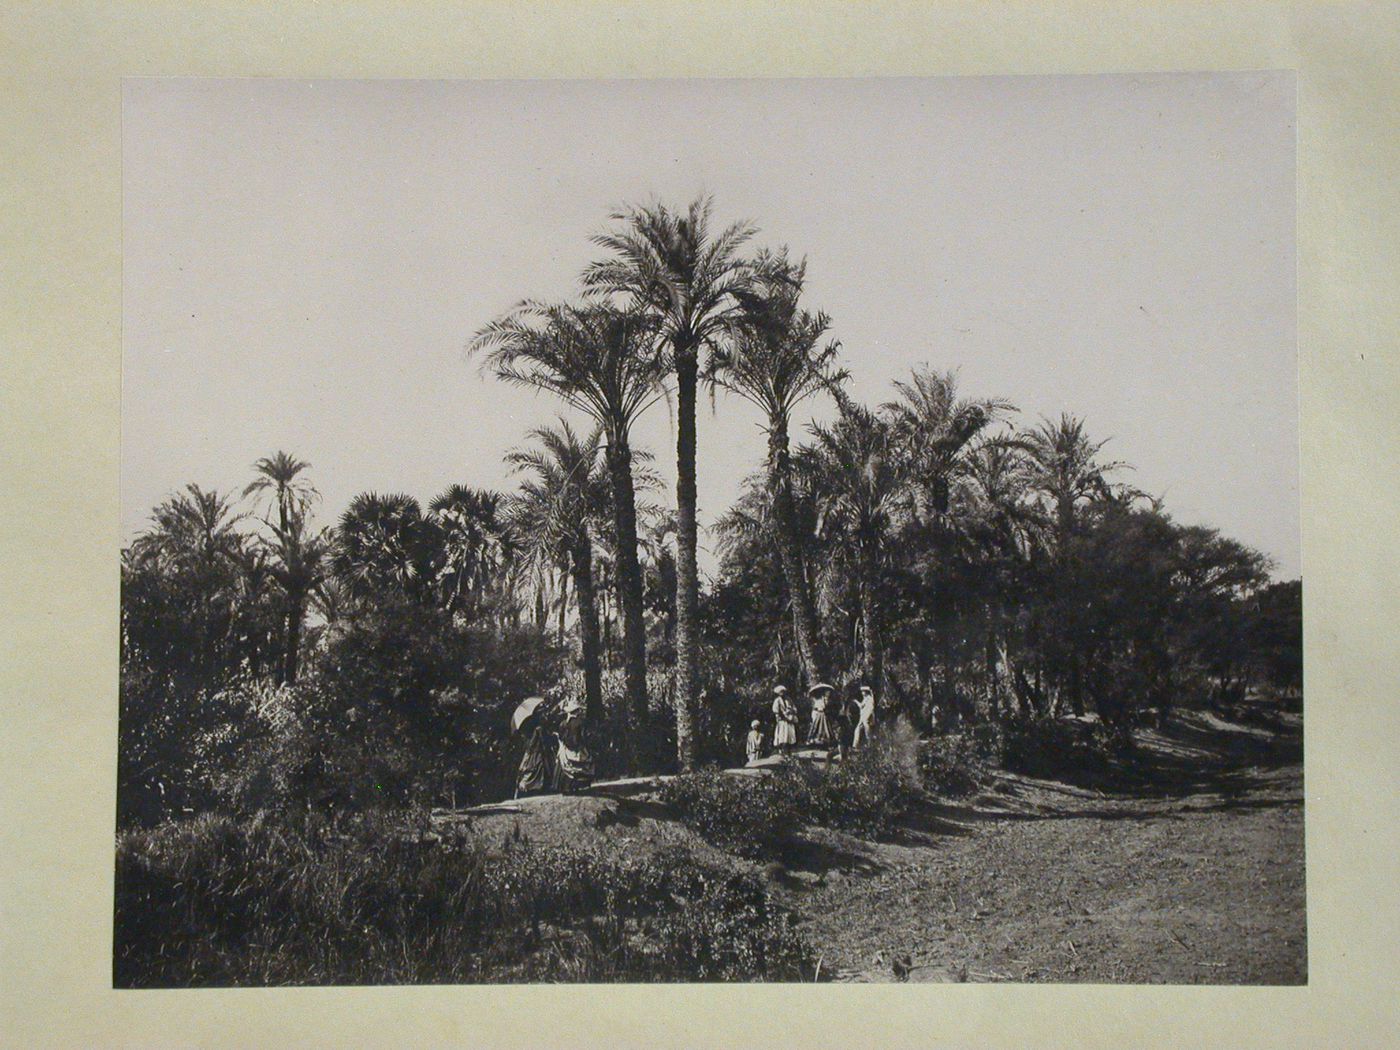 Palms by the Nile bank, Egypt